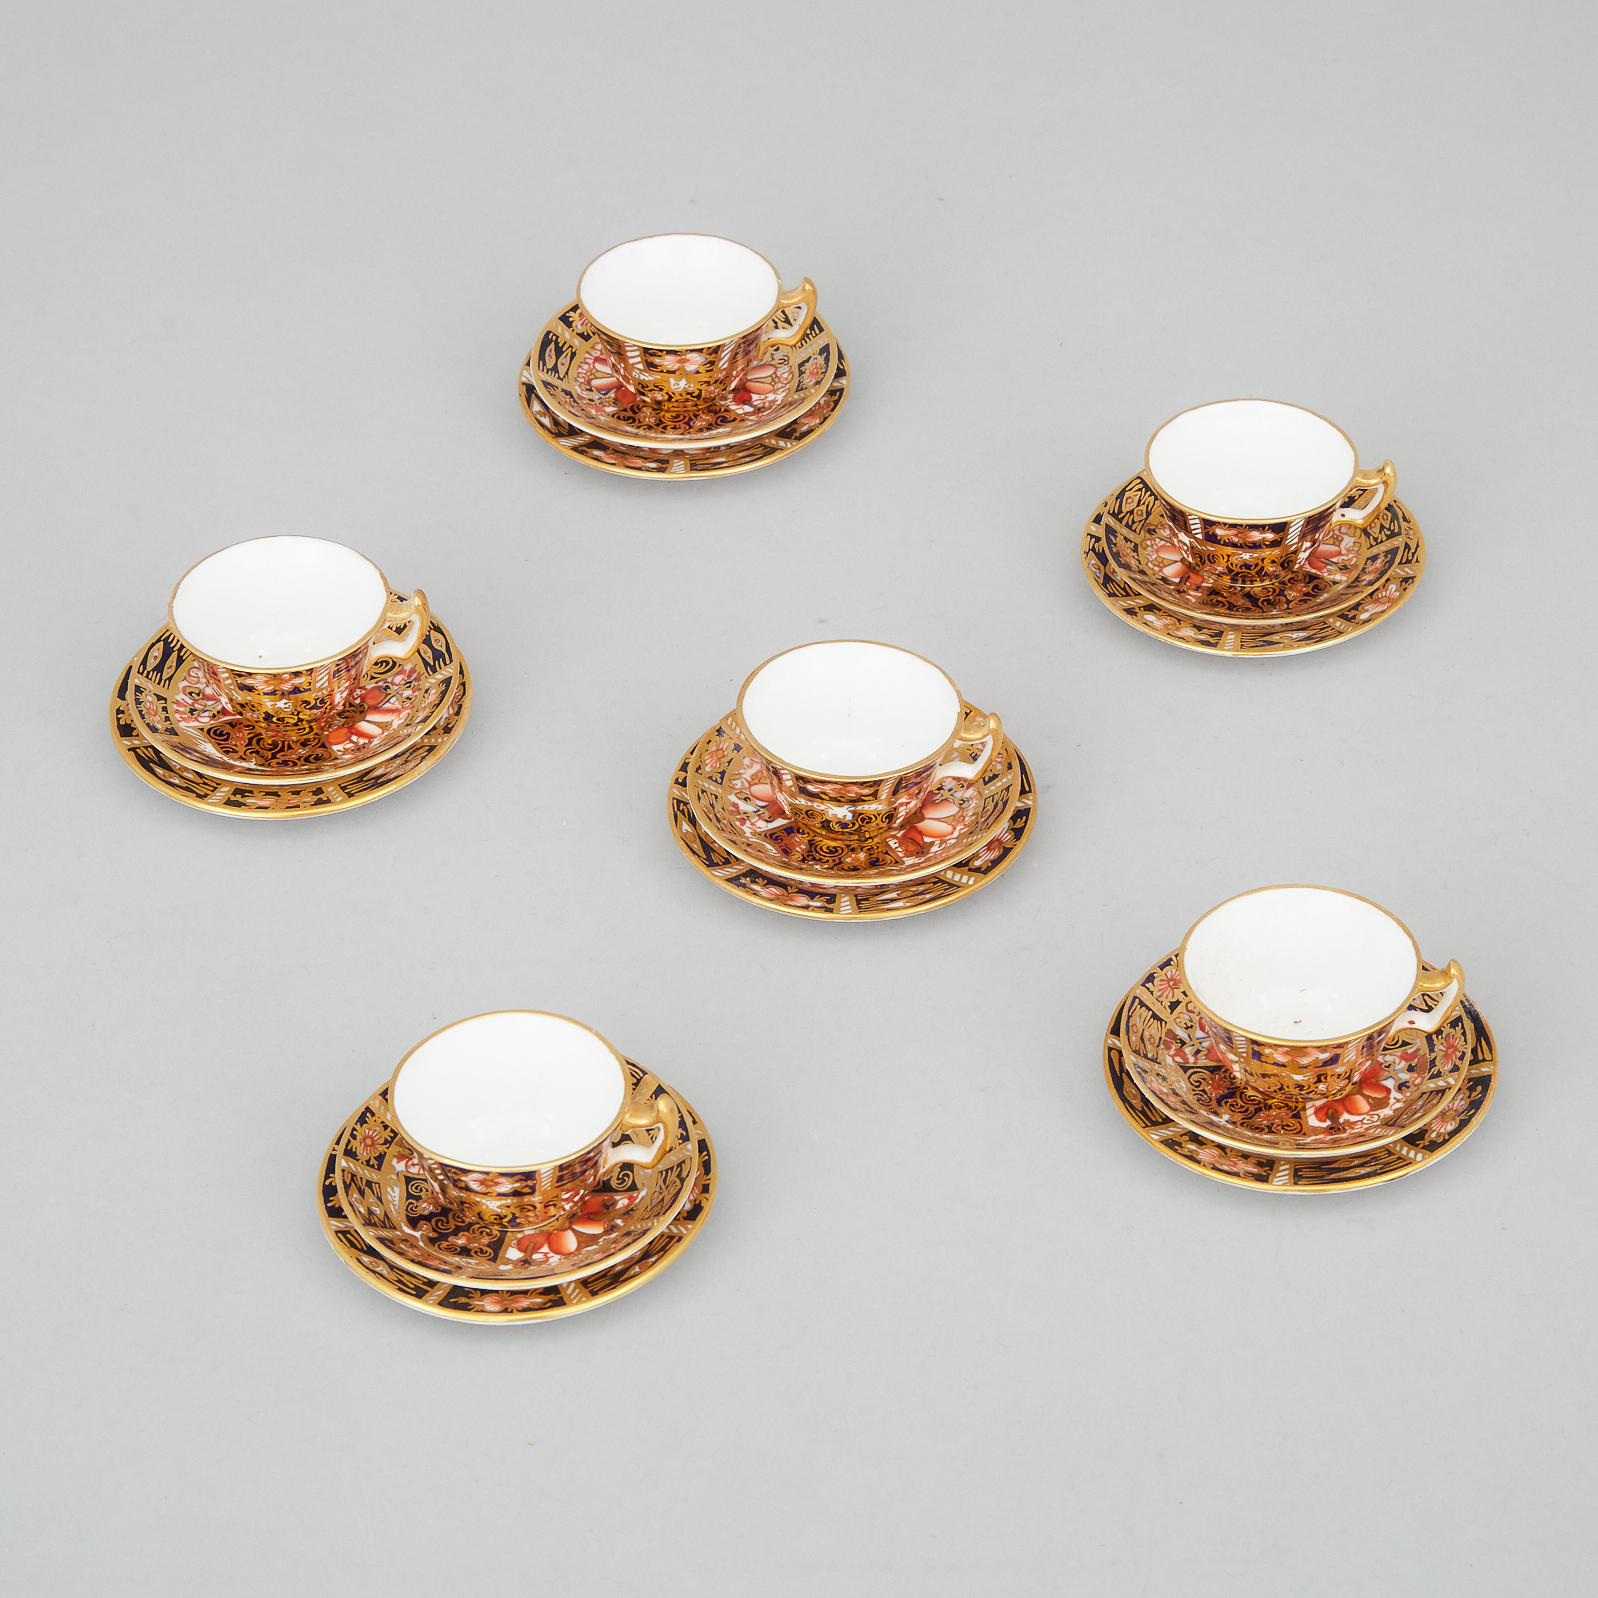 Six Royal Crown Derby 'Imari' (2451) Pattern Miniature Cups and Saucers and Six Plates, 20th century